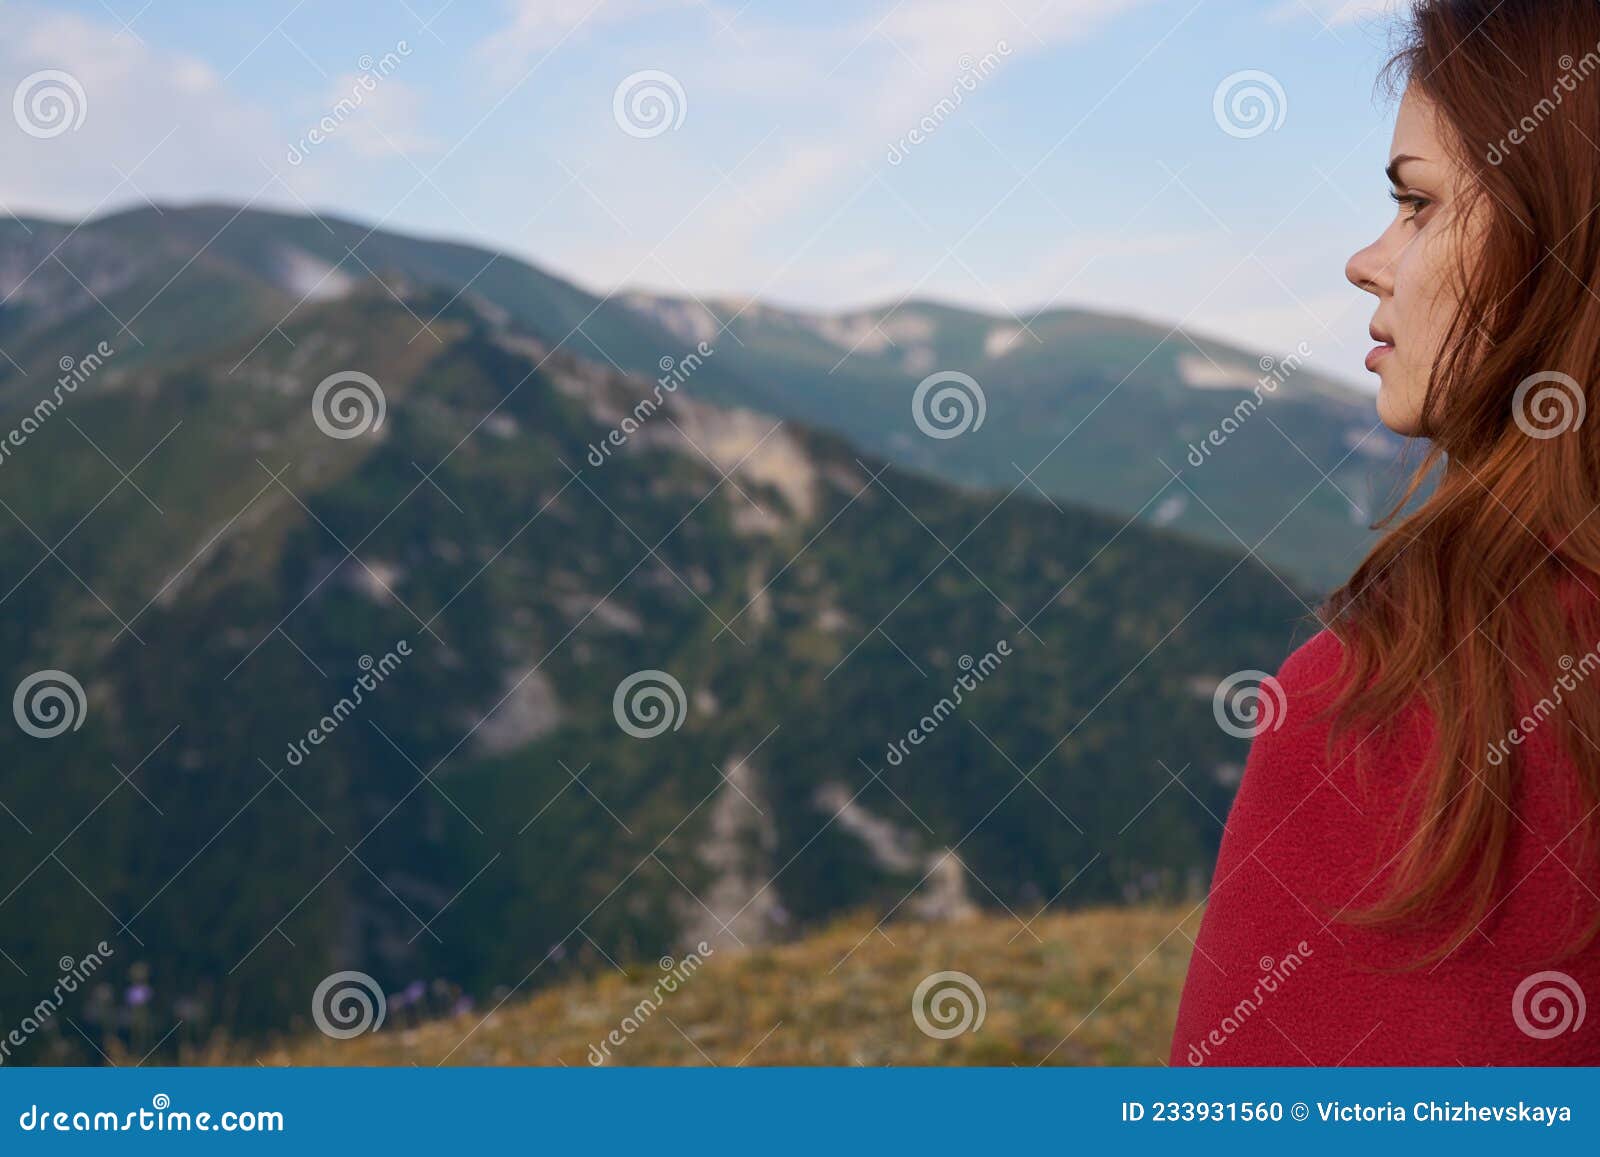 woman with red dress on nature in the mountains vacation adventure